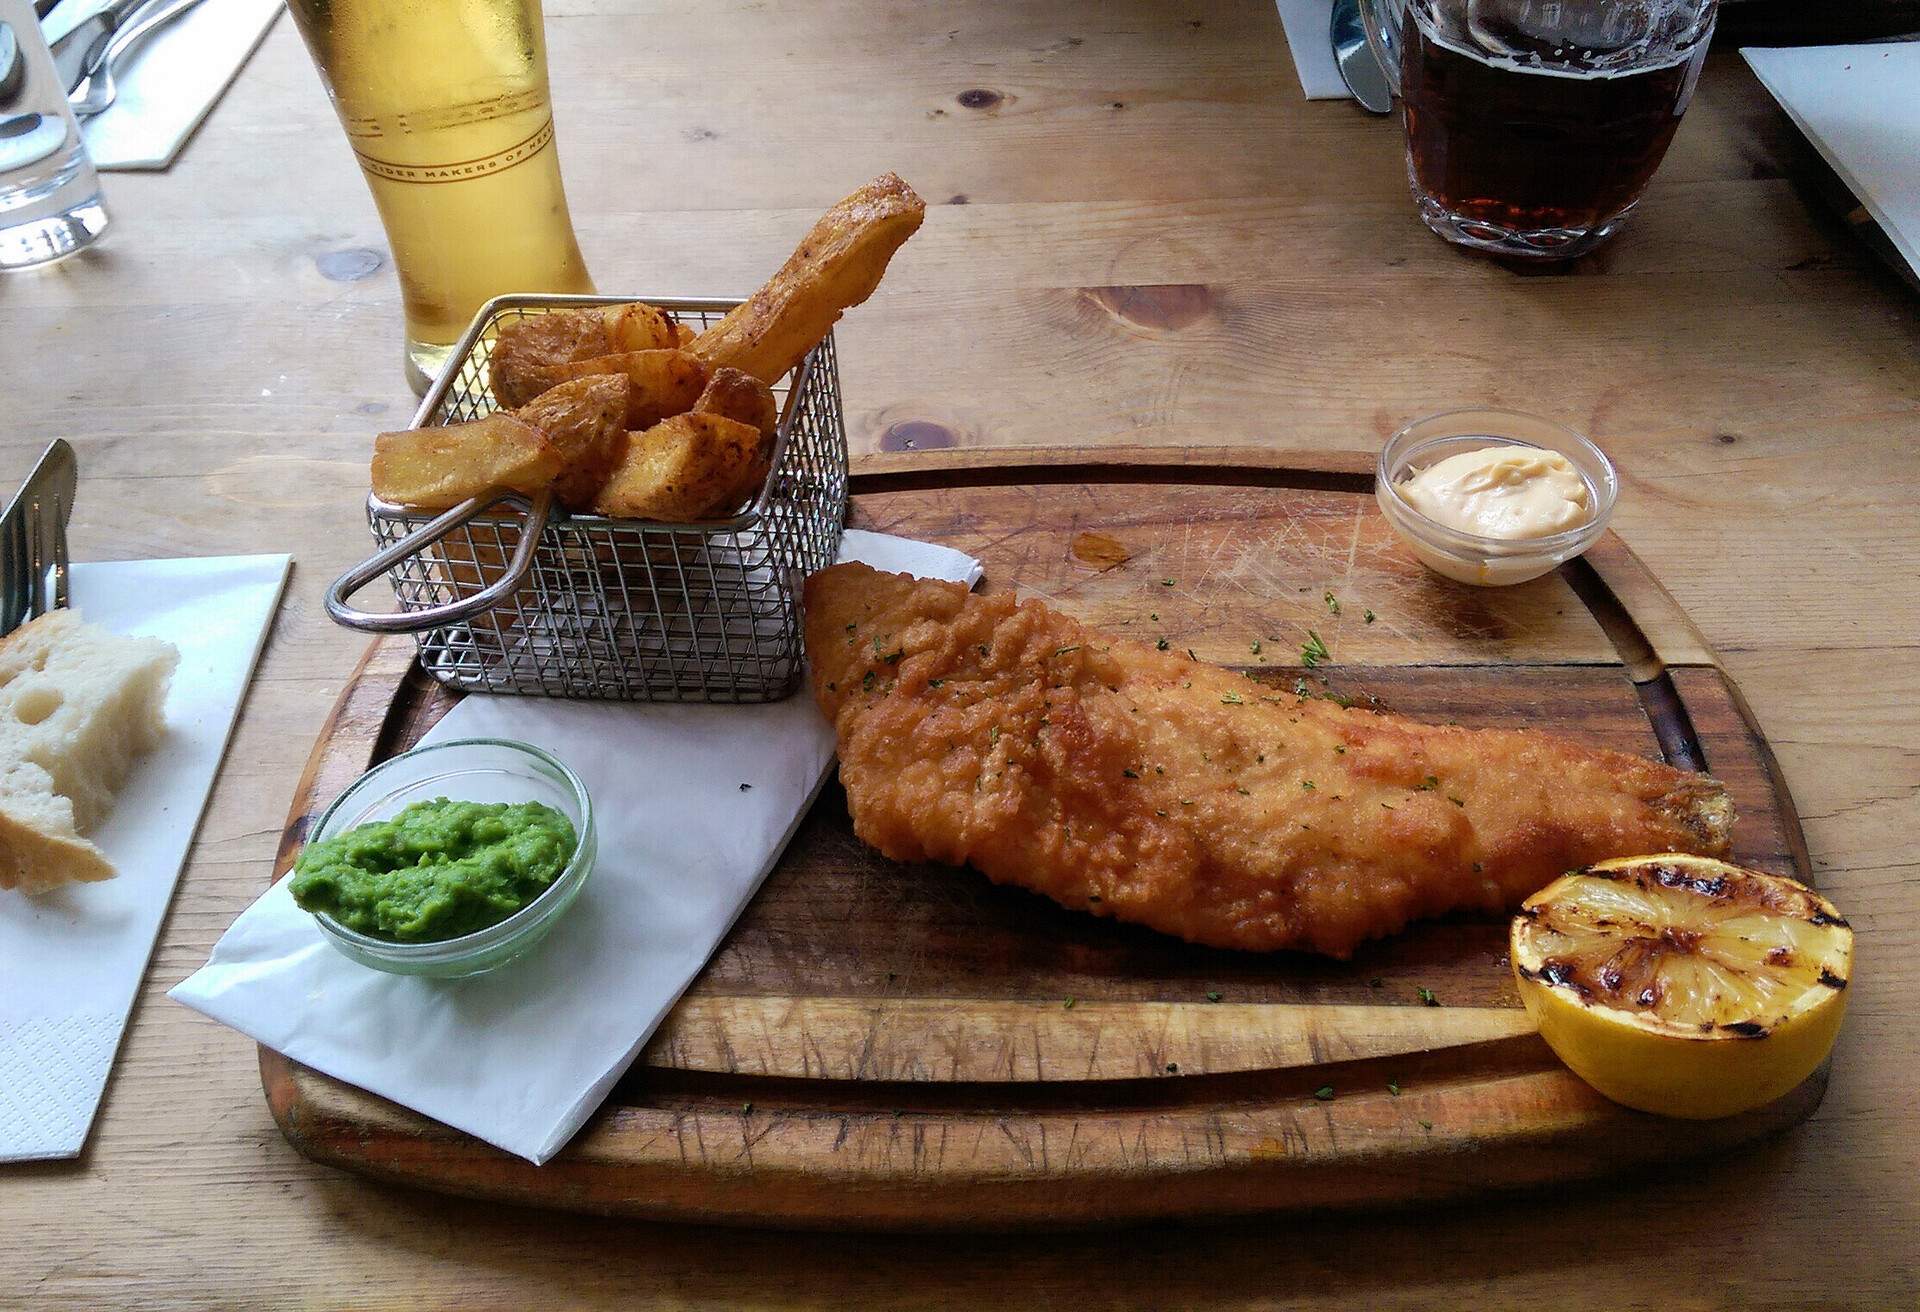 Fish and chips are presented on a wooden board with cutlery and a slice of bread on the side.